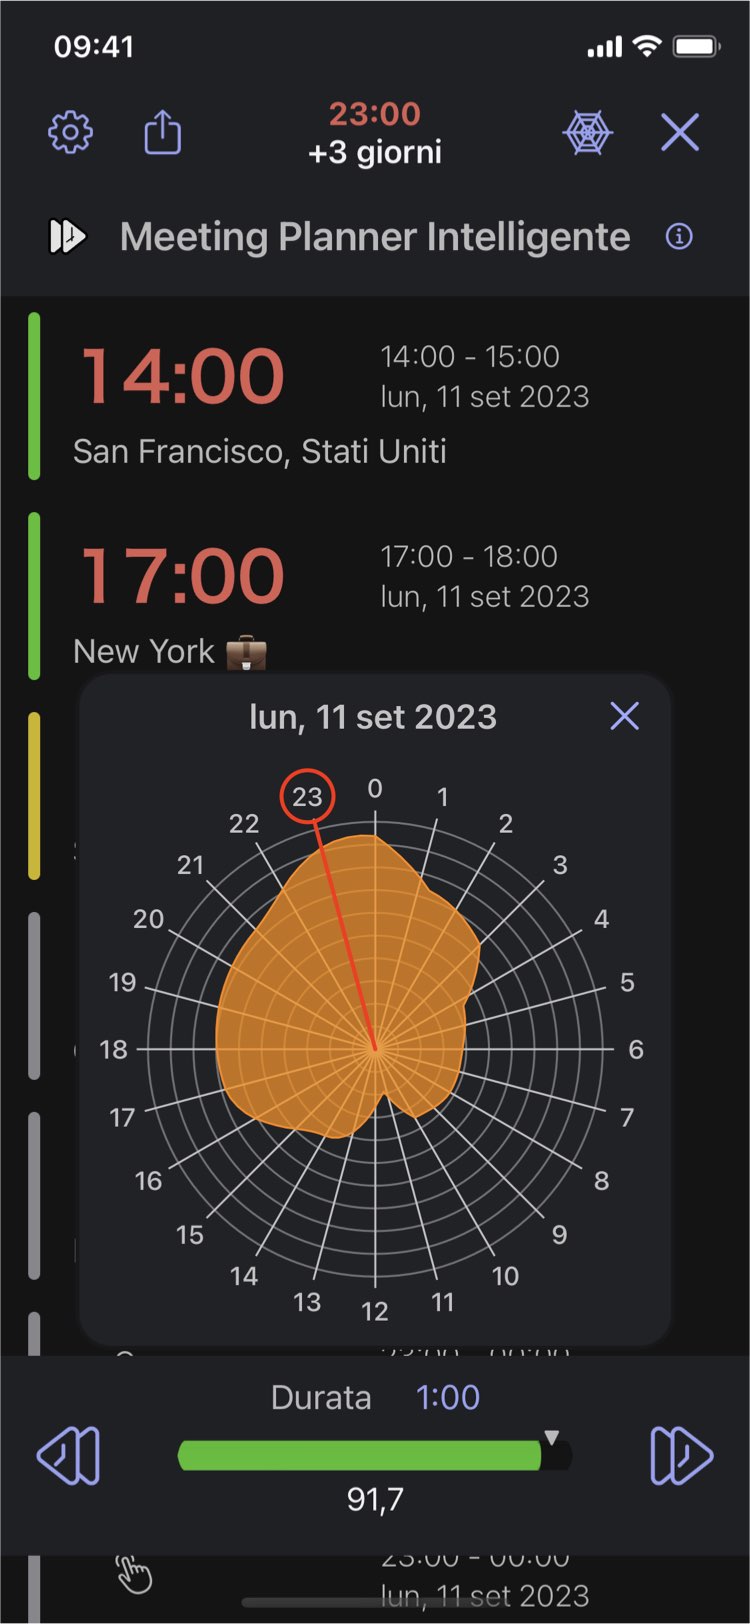 Time Intersect - Meeting Planner Intelligente